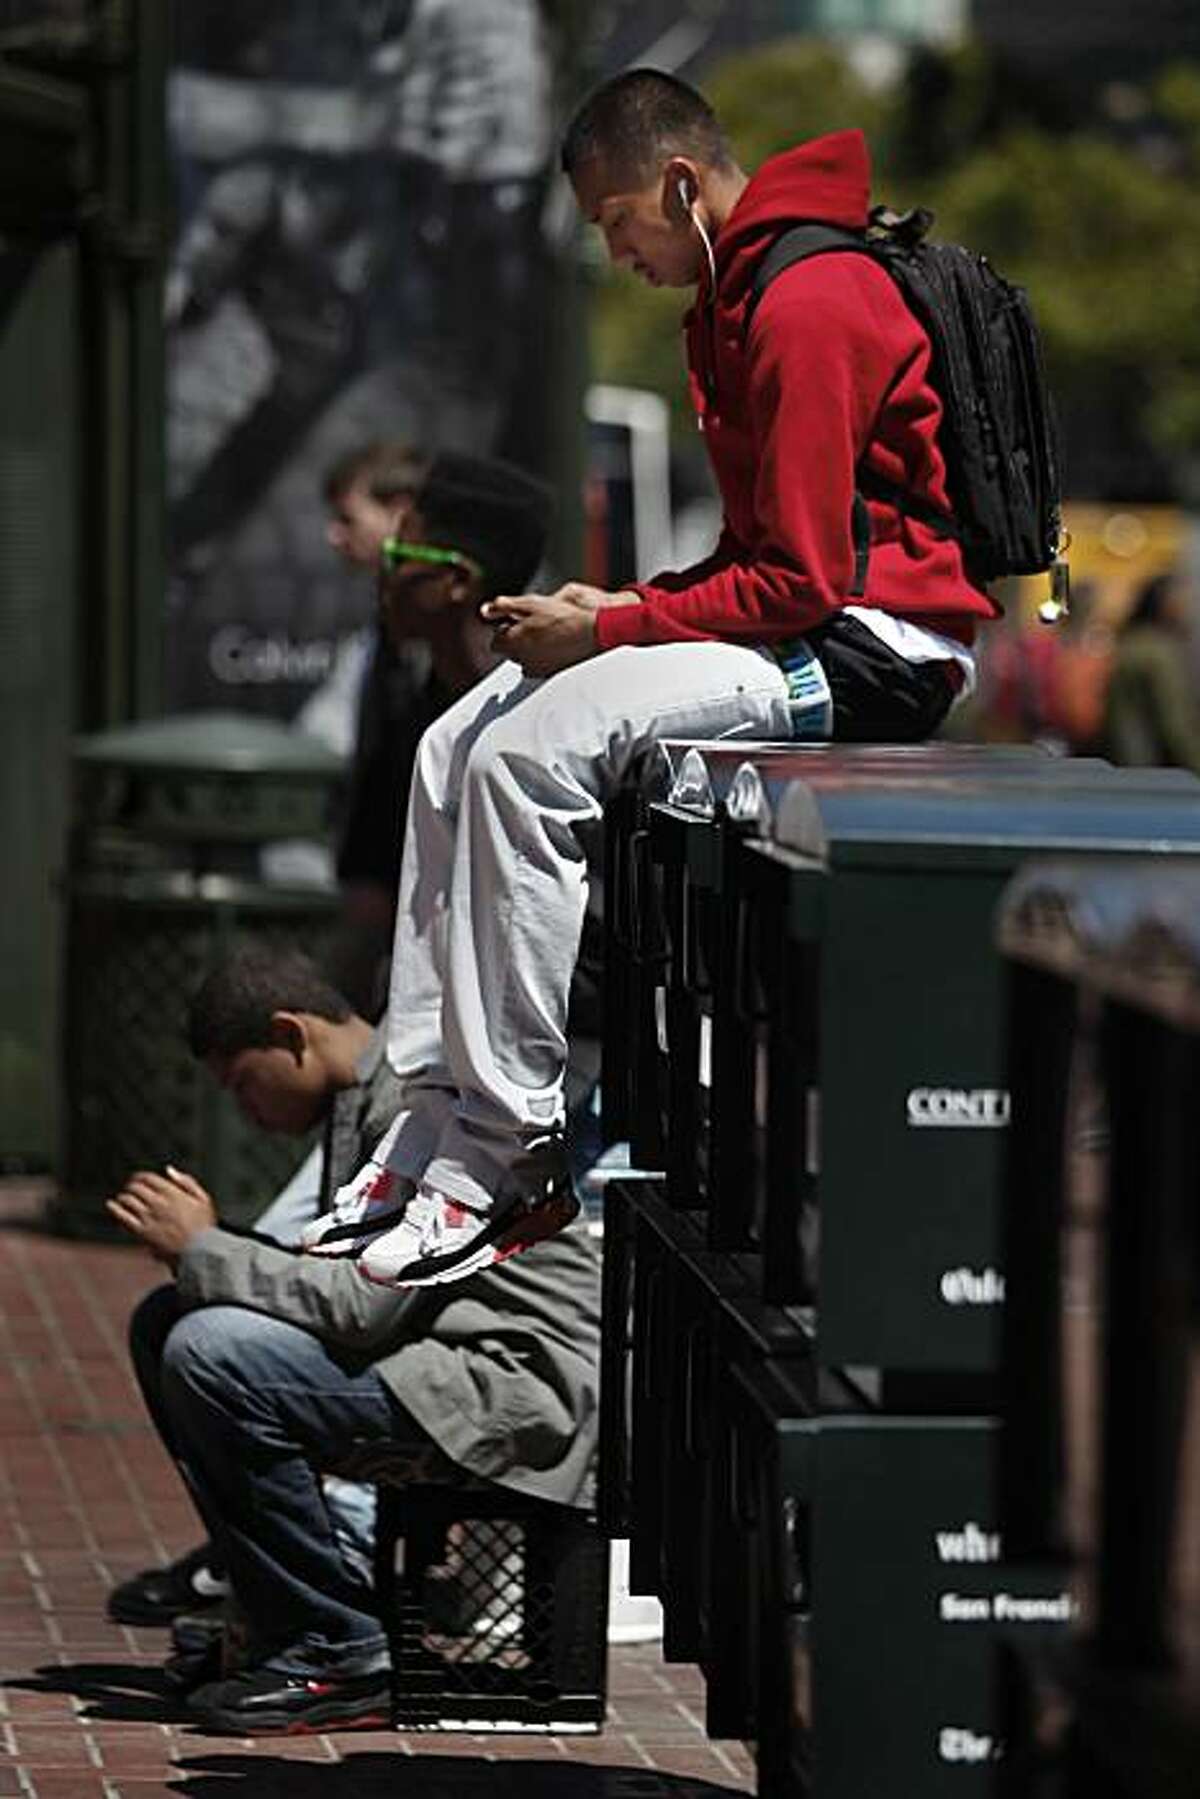 Christopher "Jtro" Navarro, 18, of San Francisco listens to music on his Ipod while sitting atop newspaper racks on Market Street in San Francisco, Calif. on Tuesday August 17, 2010.